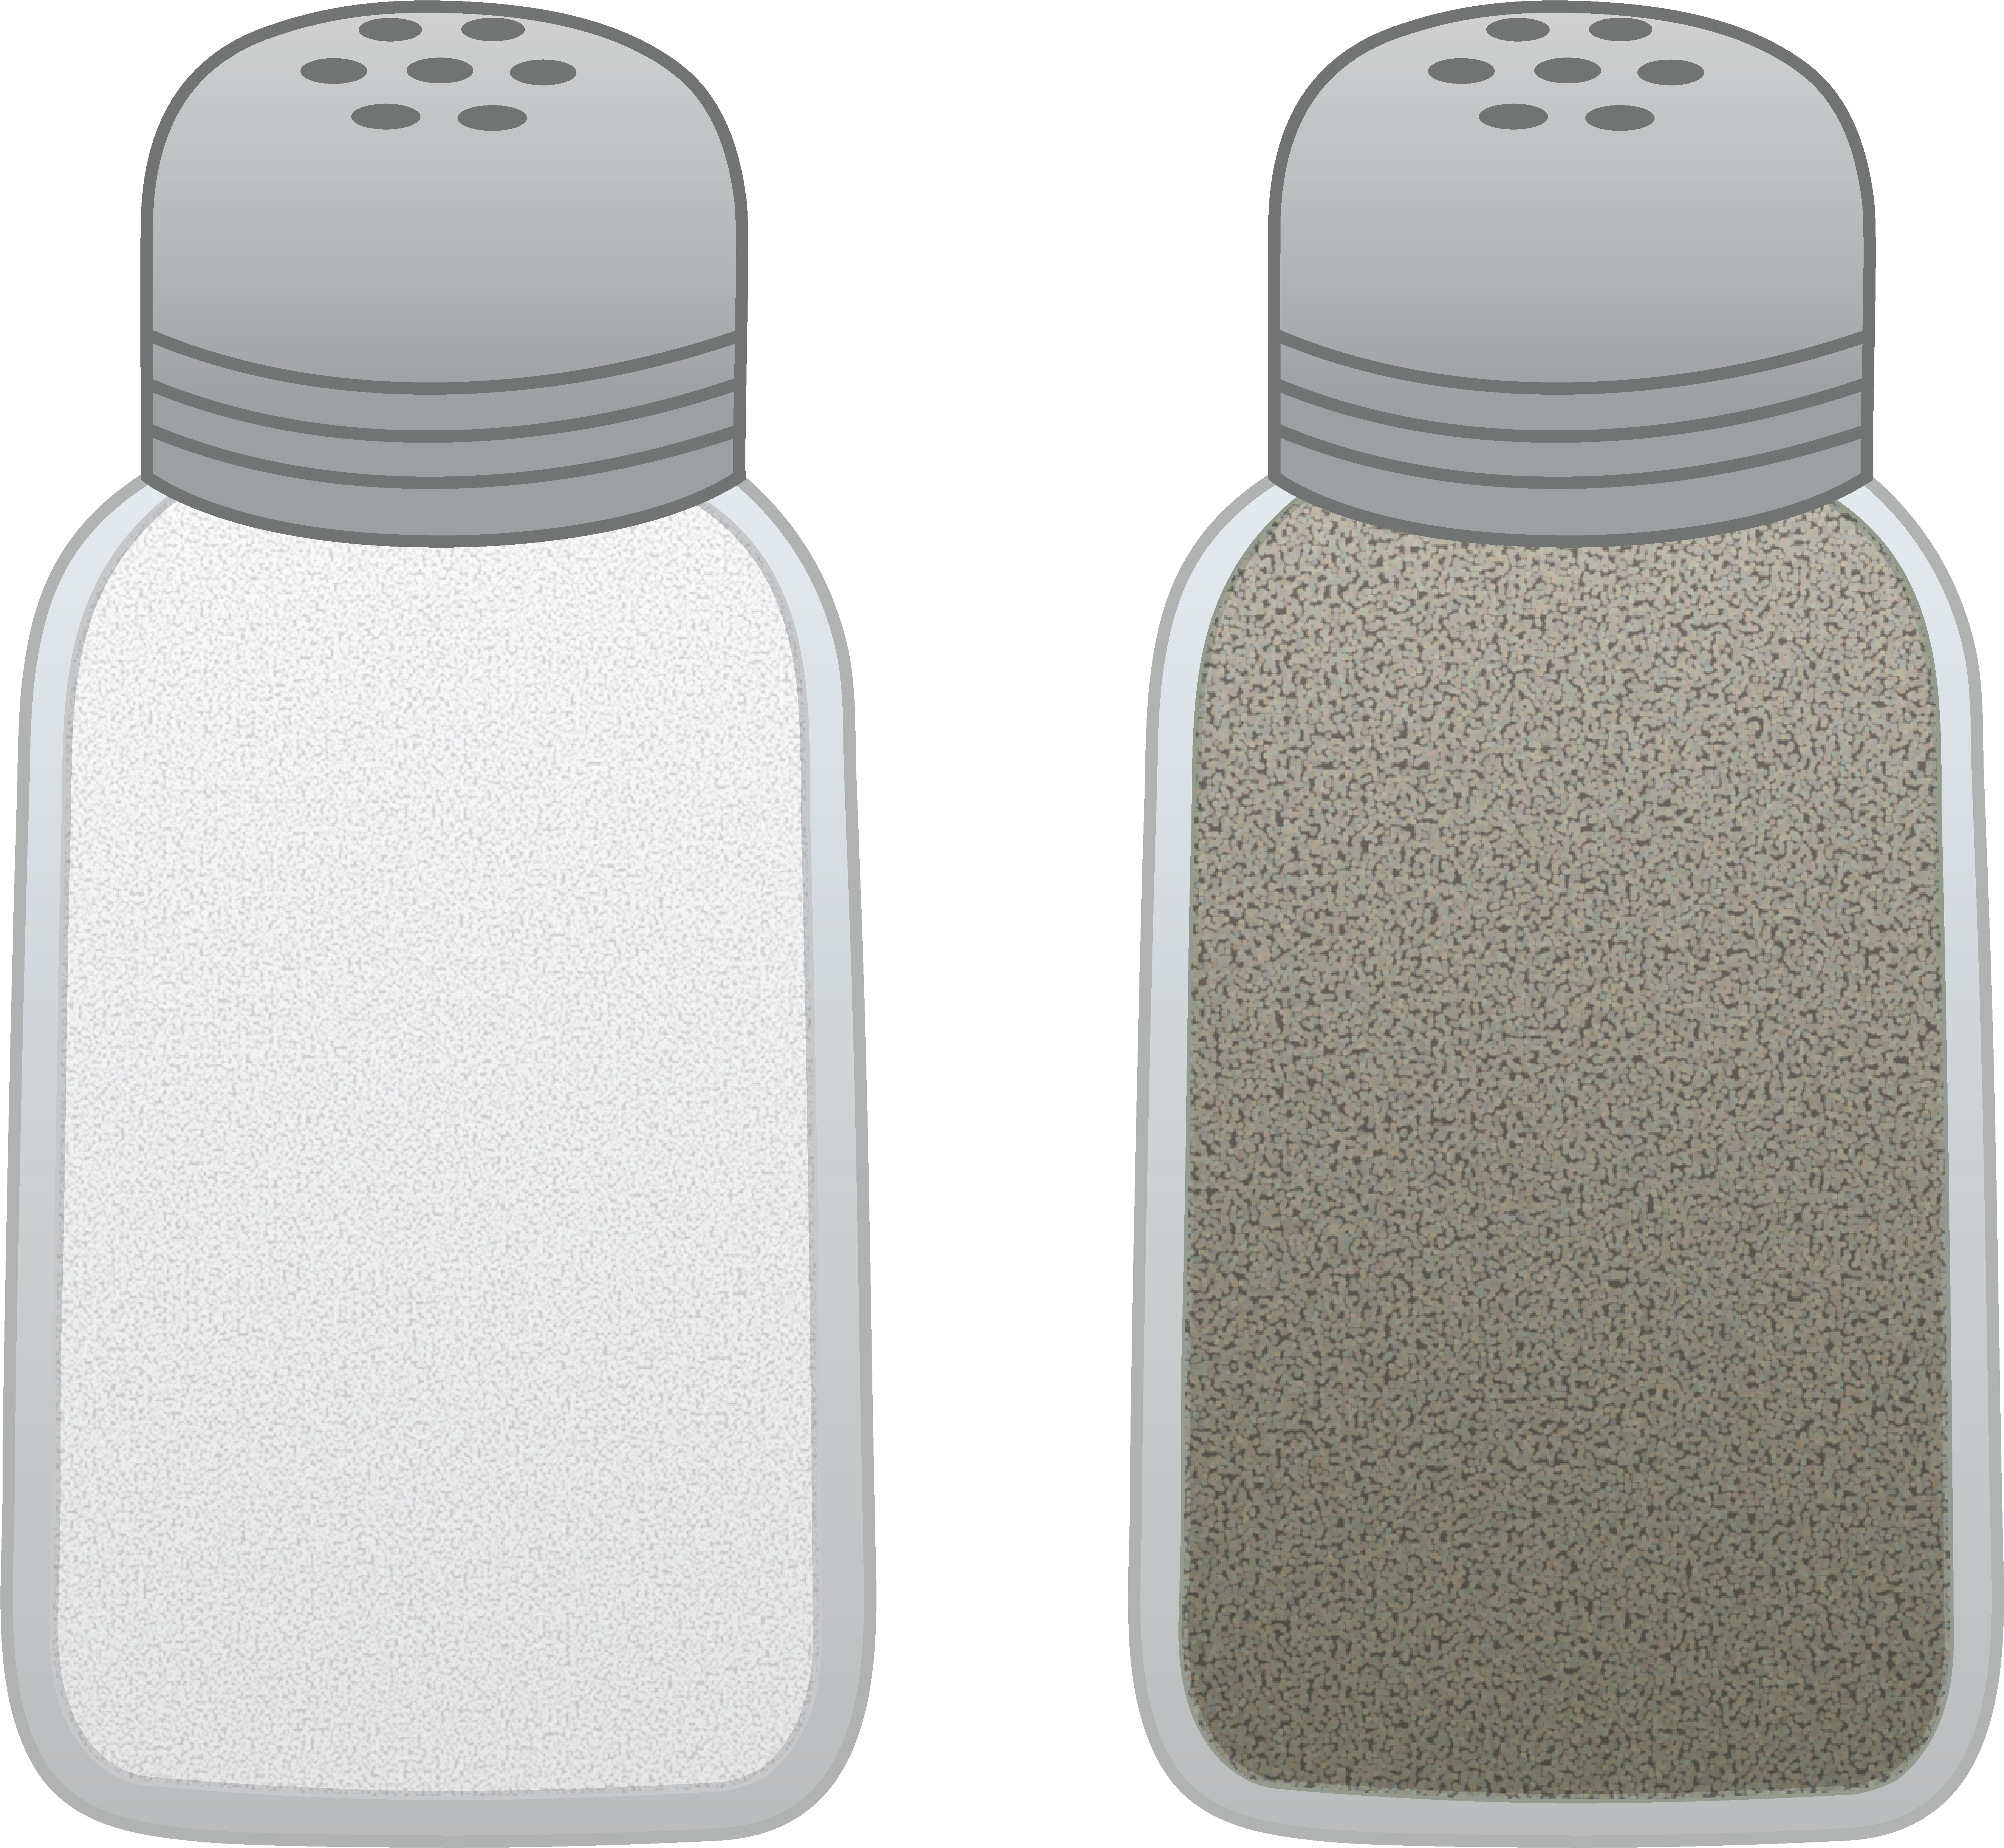 A Salt Shaker With A Black Background